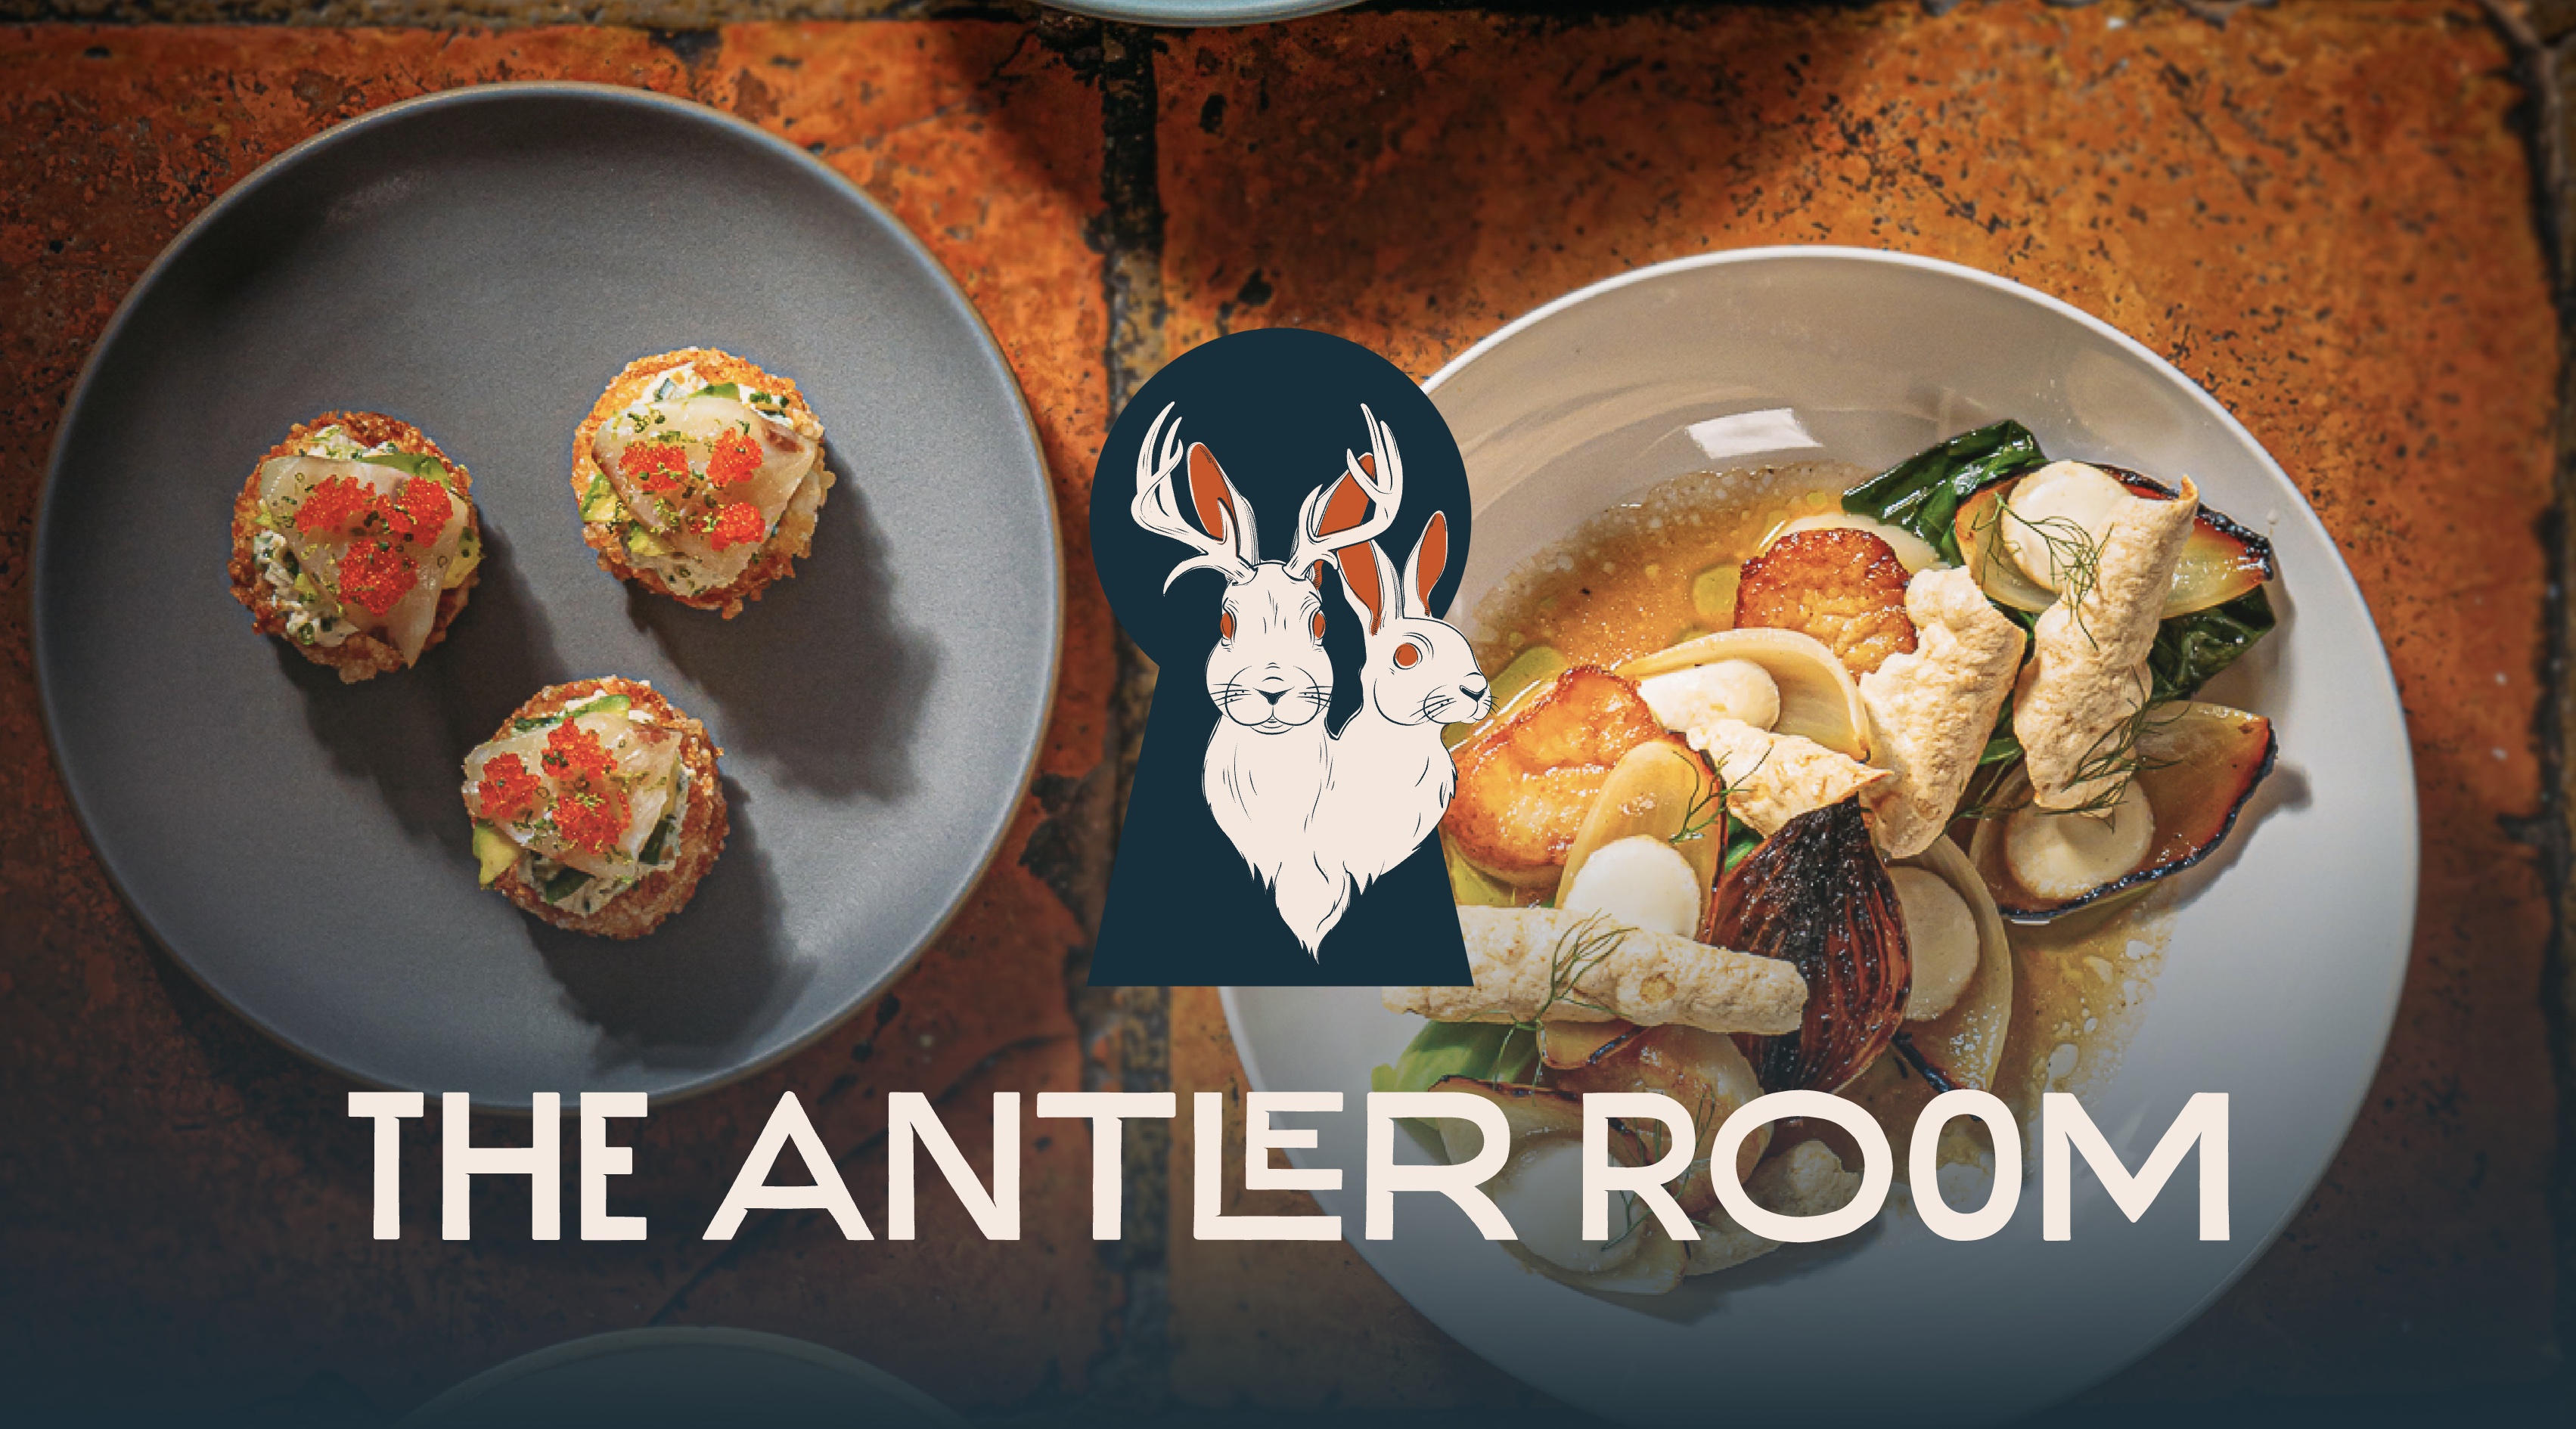 The Antler Room. A neighborhood restaurant and bar inspired by East-West trade routes.